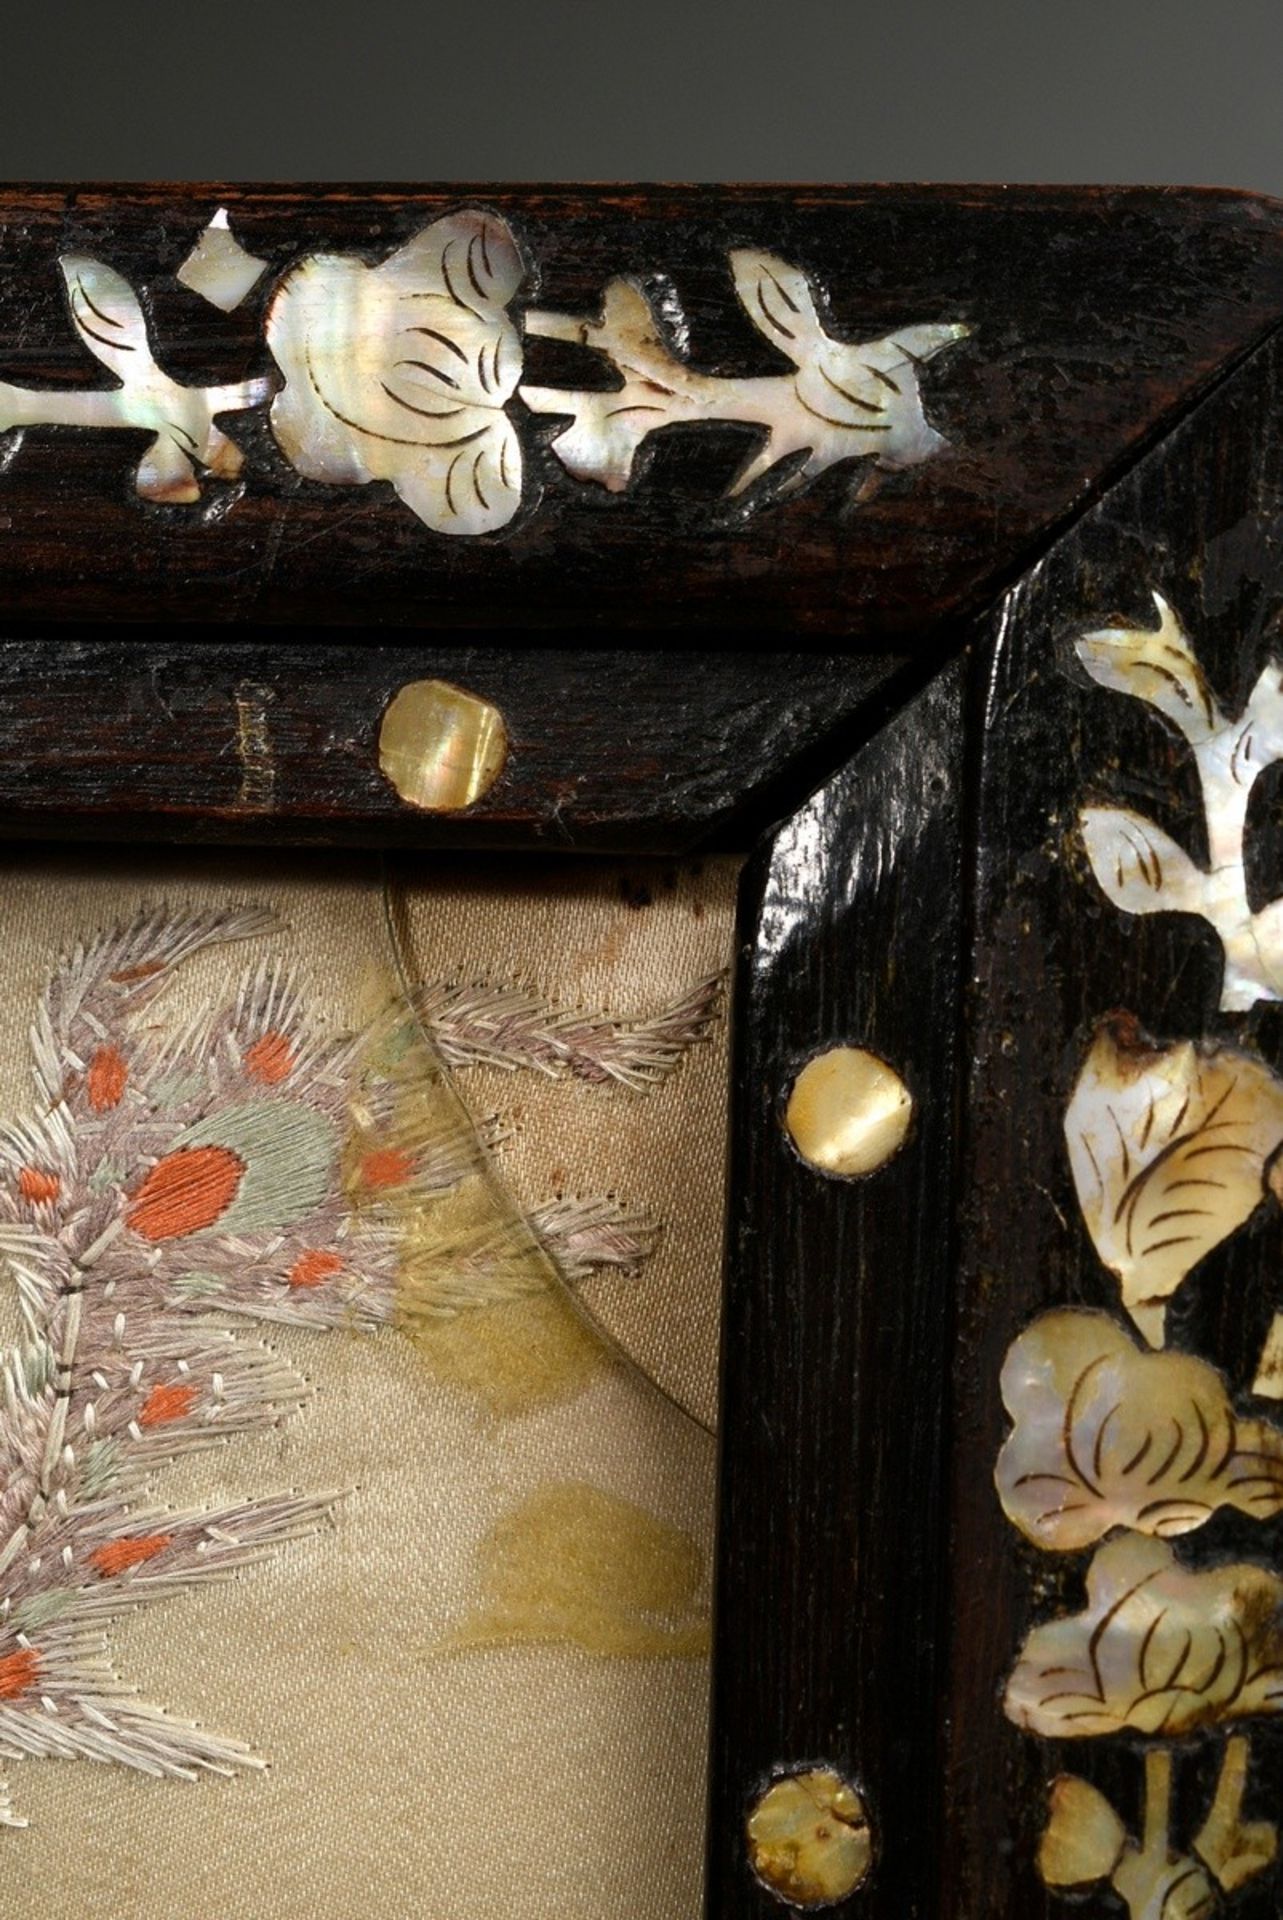 Pair of silk flat embroideries "Peacocks" and "Phoenixes" in mother-of-pearl covered blackwood fram - Image 8 of 9